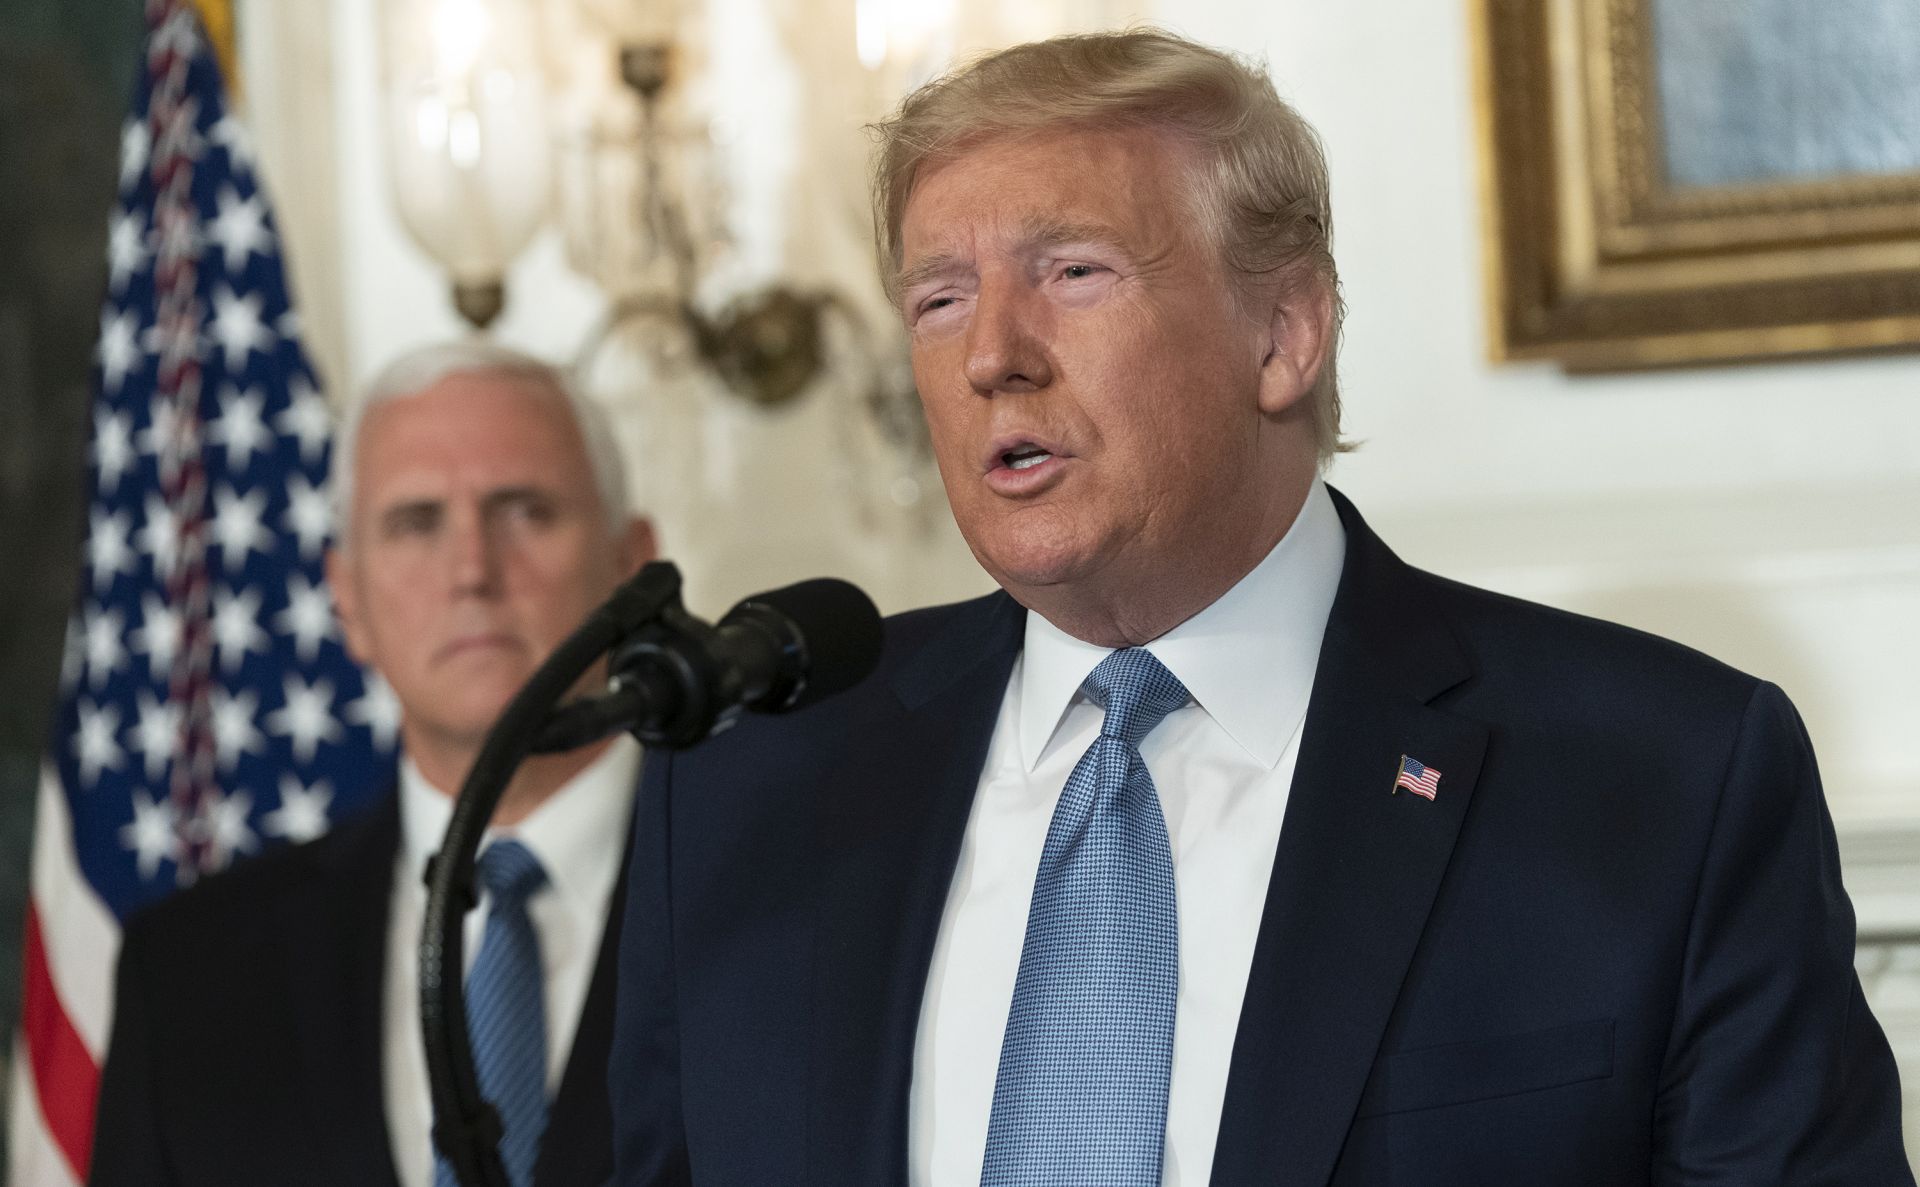 epa07757952 US President Donald J. Trump makes a statement at the White House in Washington, DC, USA, on 05 August 2019 in response to two separate shooting incidents. US Vice President Mike Pence looks on from left.  EPA/Chris Kleponis / POOL